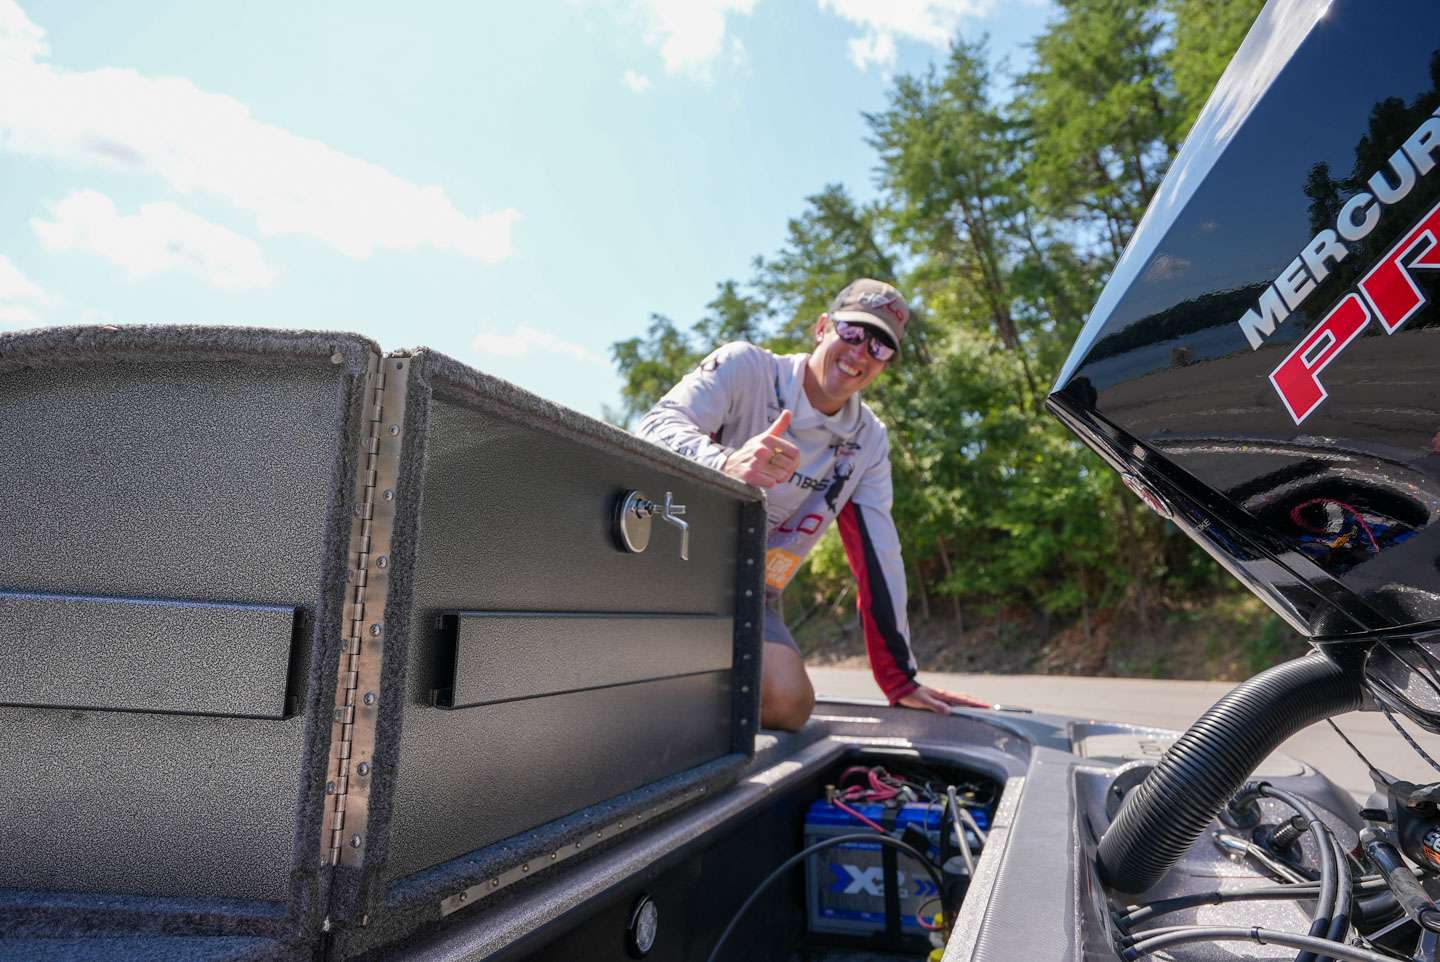 One of his favorite features of the boat is the entire battery compartment. There is so much space and it is easy to access the batteries. 